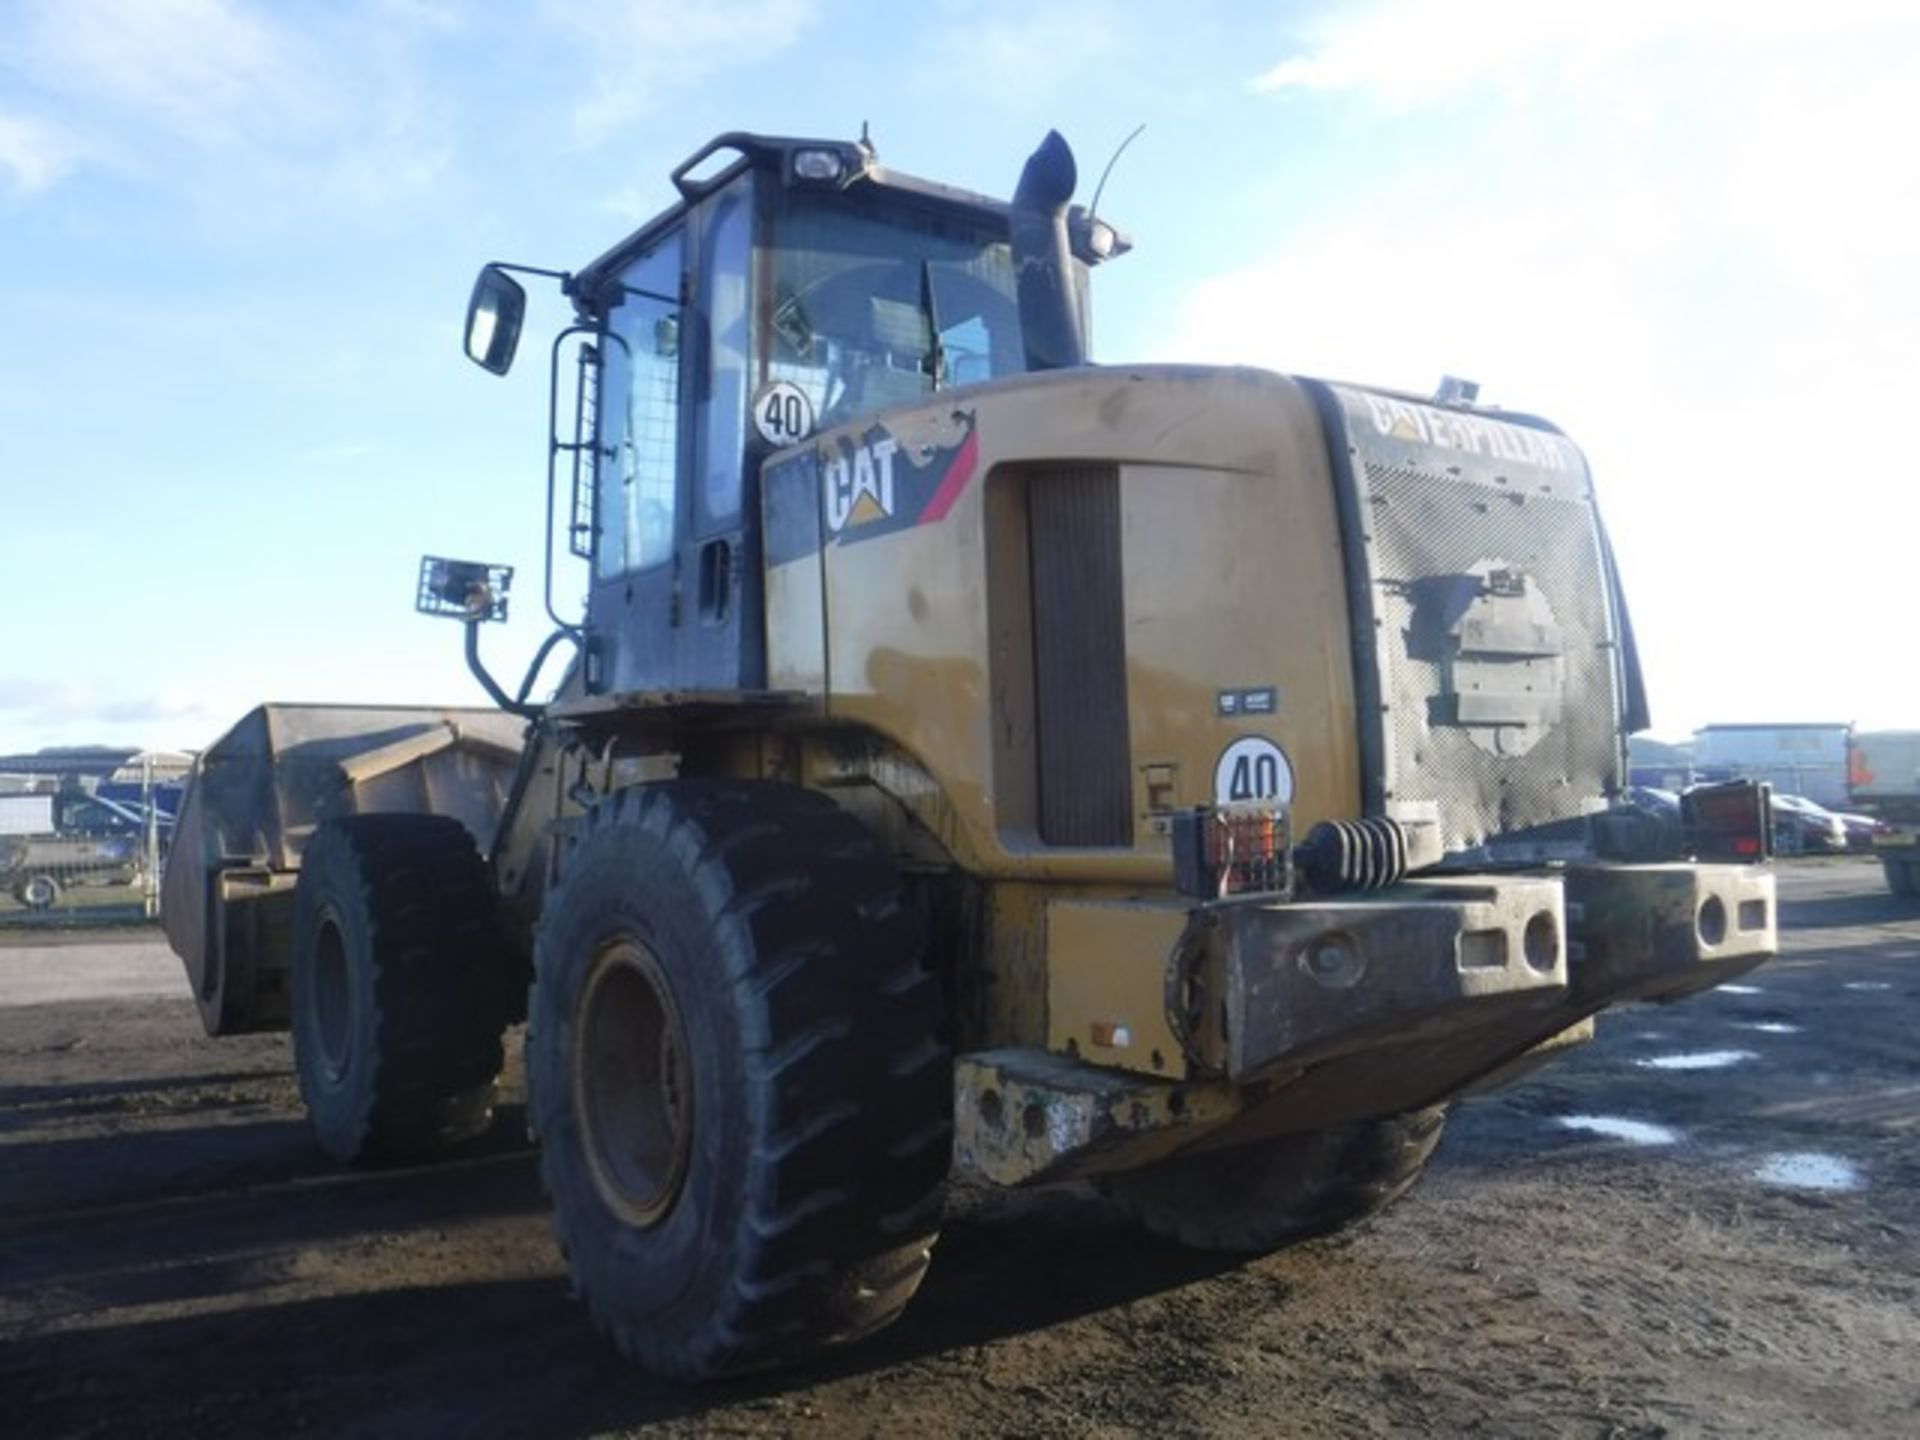 2008 CAT 930H loading shovel 21,474 hrs sold complete with hi tip bucket and window guards S/N CAT09 - Image 5 of 13